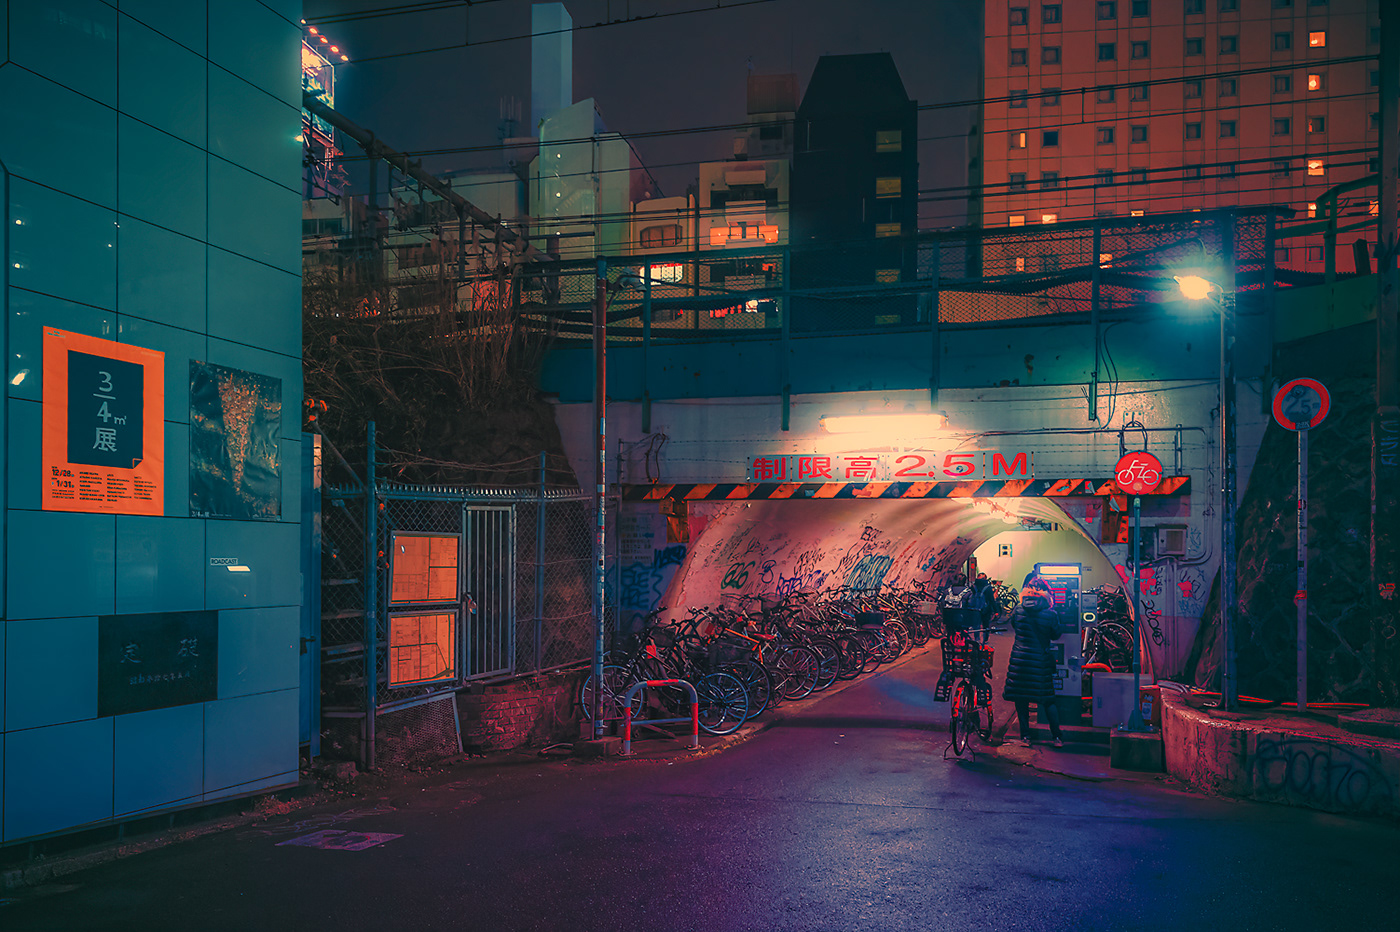 Anthony presley art culture japan night Photography  Street surreal tokyo Travel